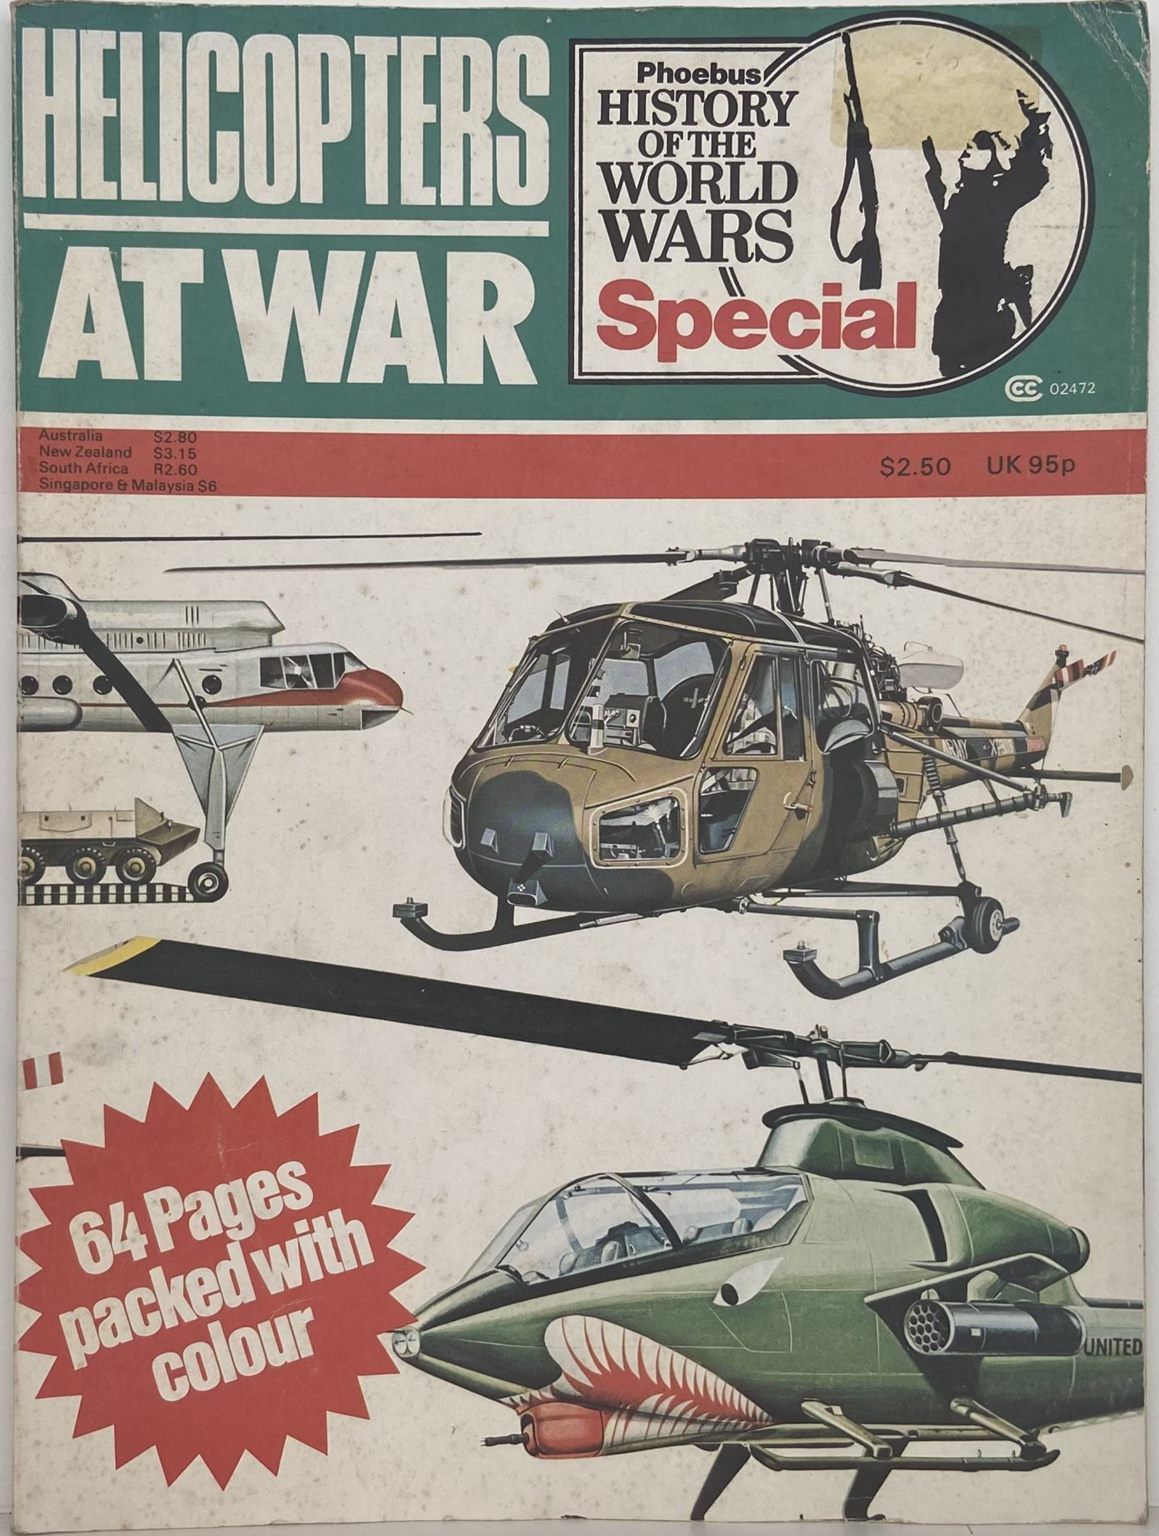 HELICOPTERS AT WAR